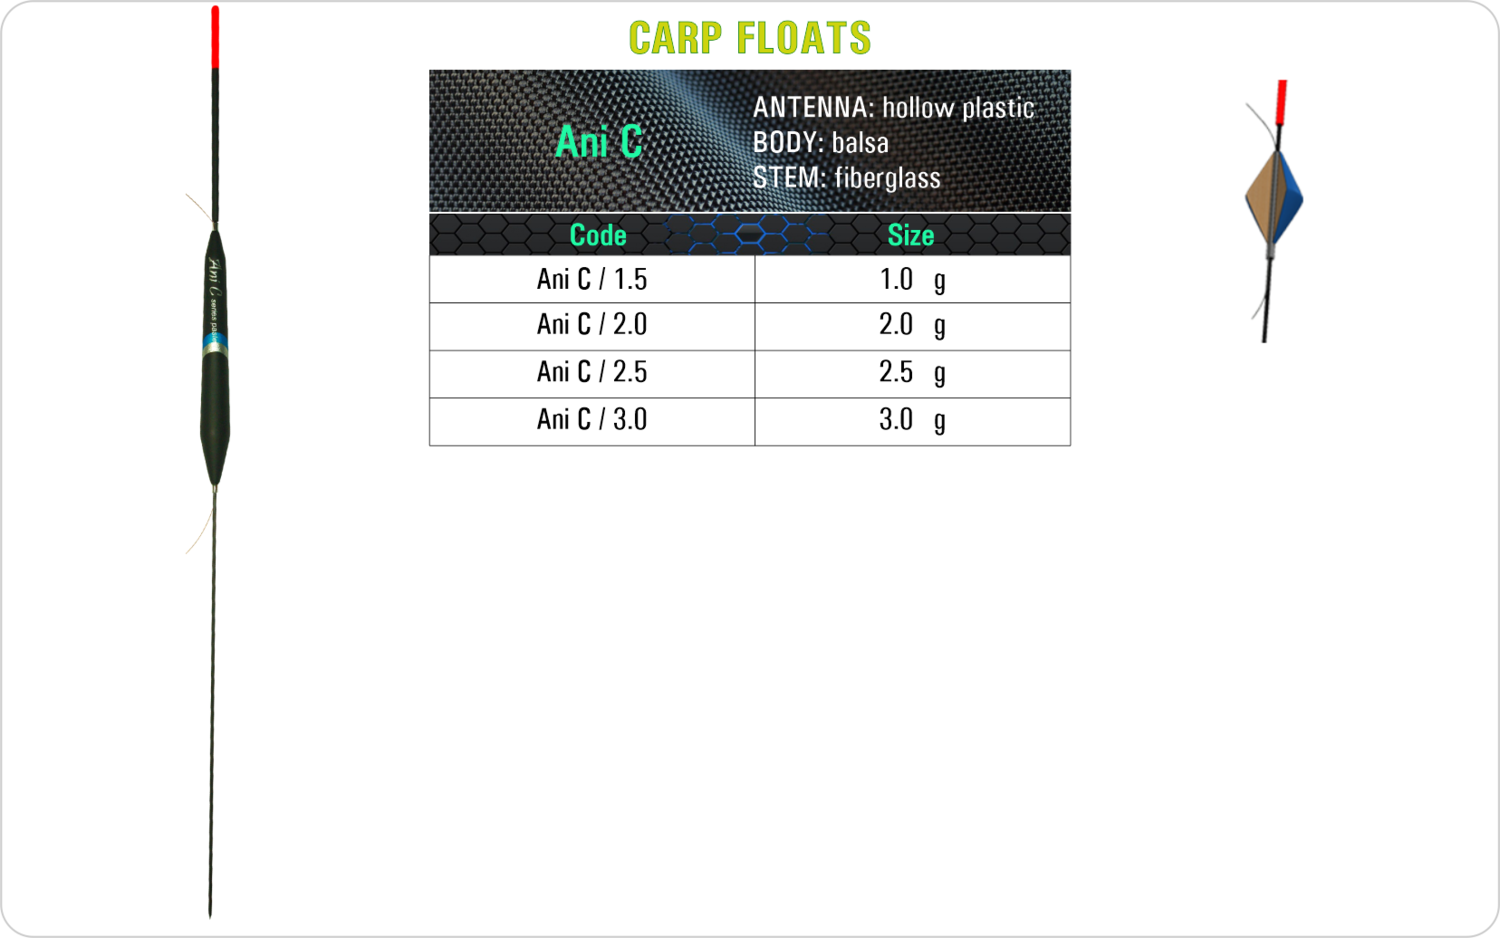 SF Ani C Carp float model and table containing an additional information about this float with different codes, sizes, types of the body, the stem and the antenna of the float.